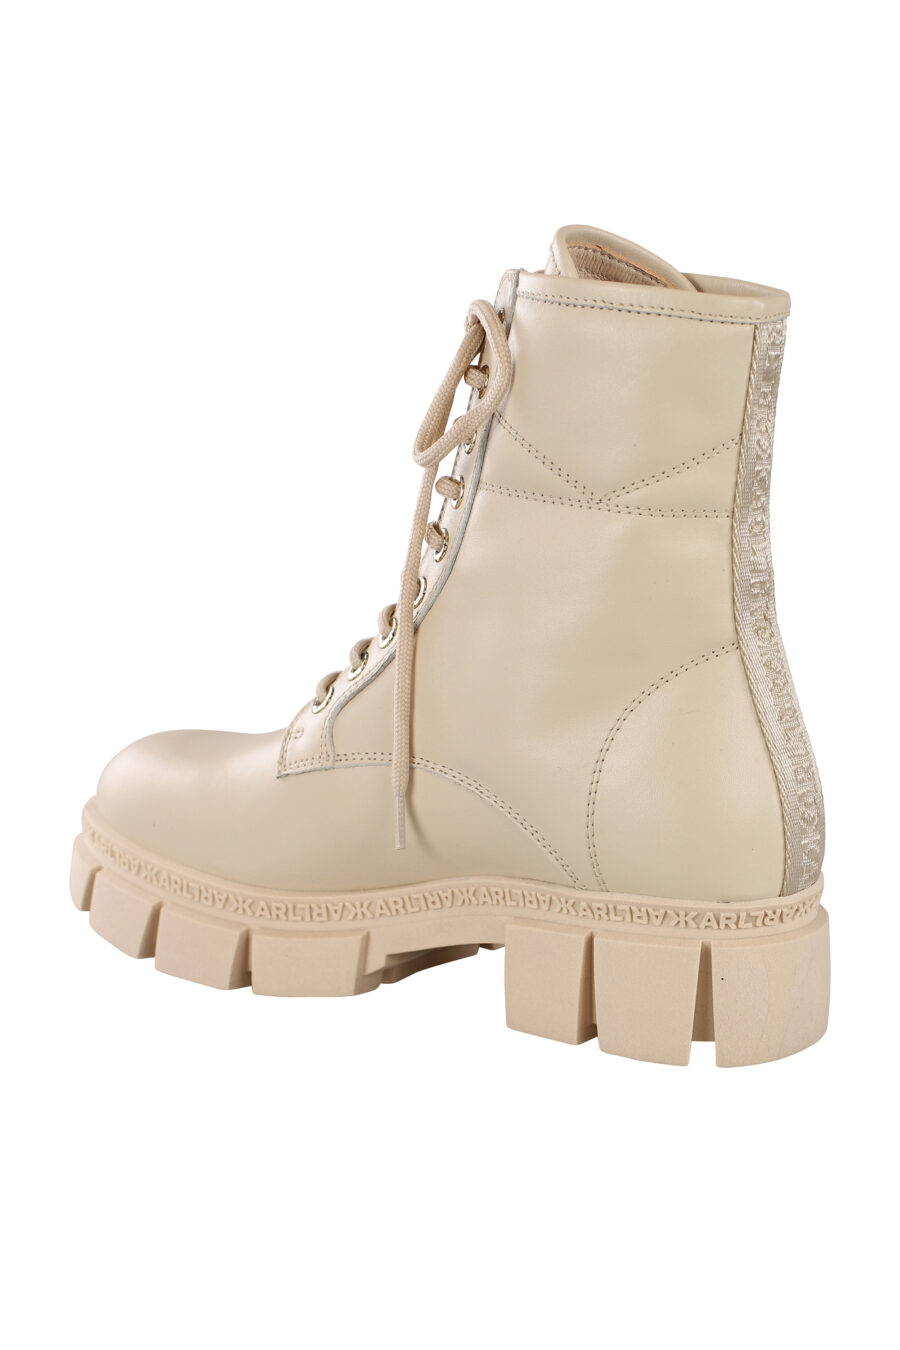 Beige lace-up ankle boots with small gold logo - IMG 6860